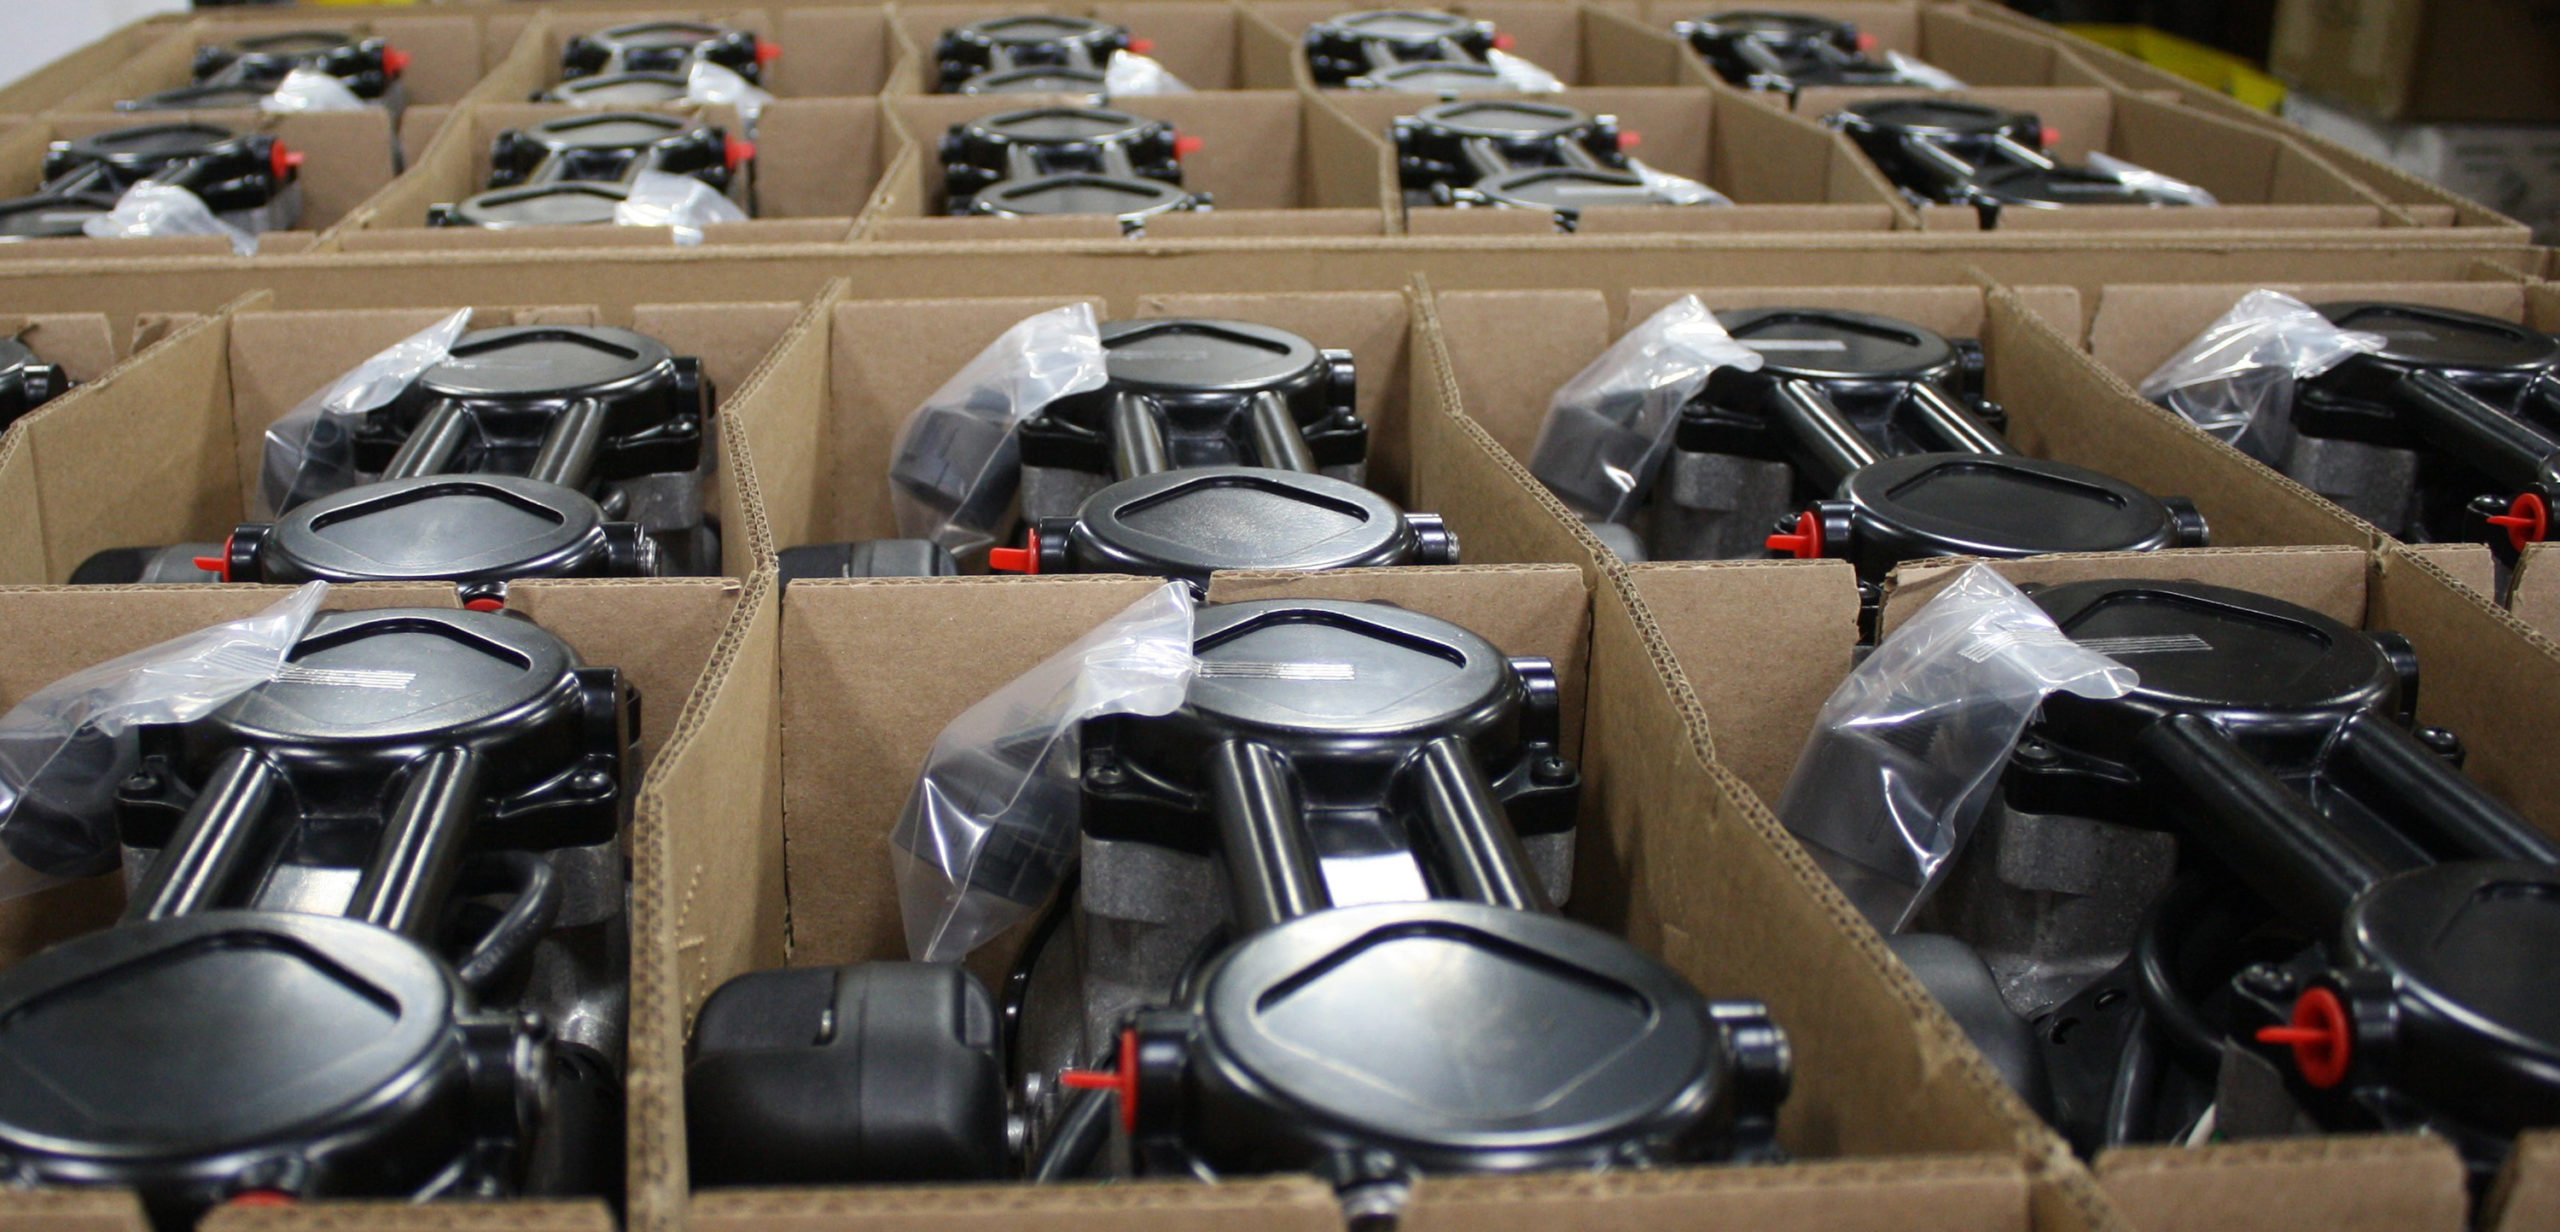 Air compressor and vacuum pumps in a box ready for delivery